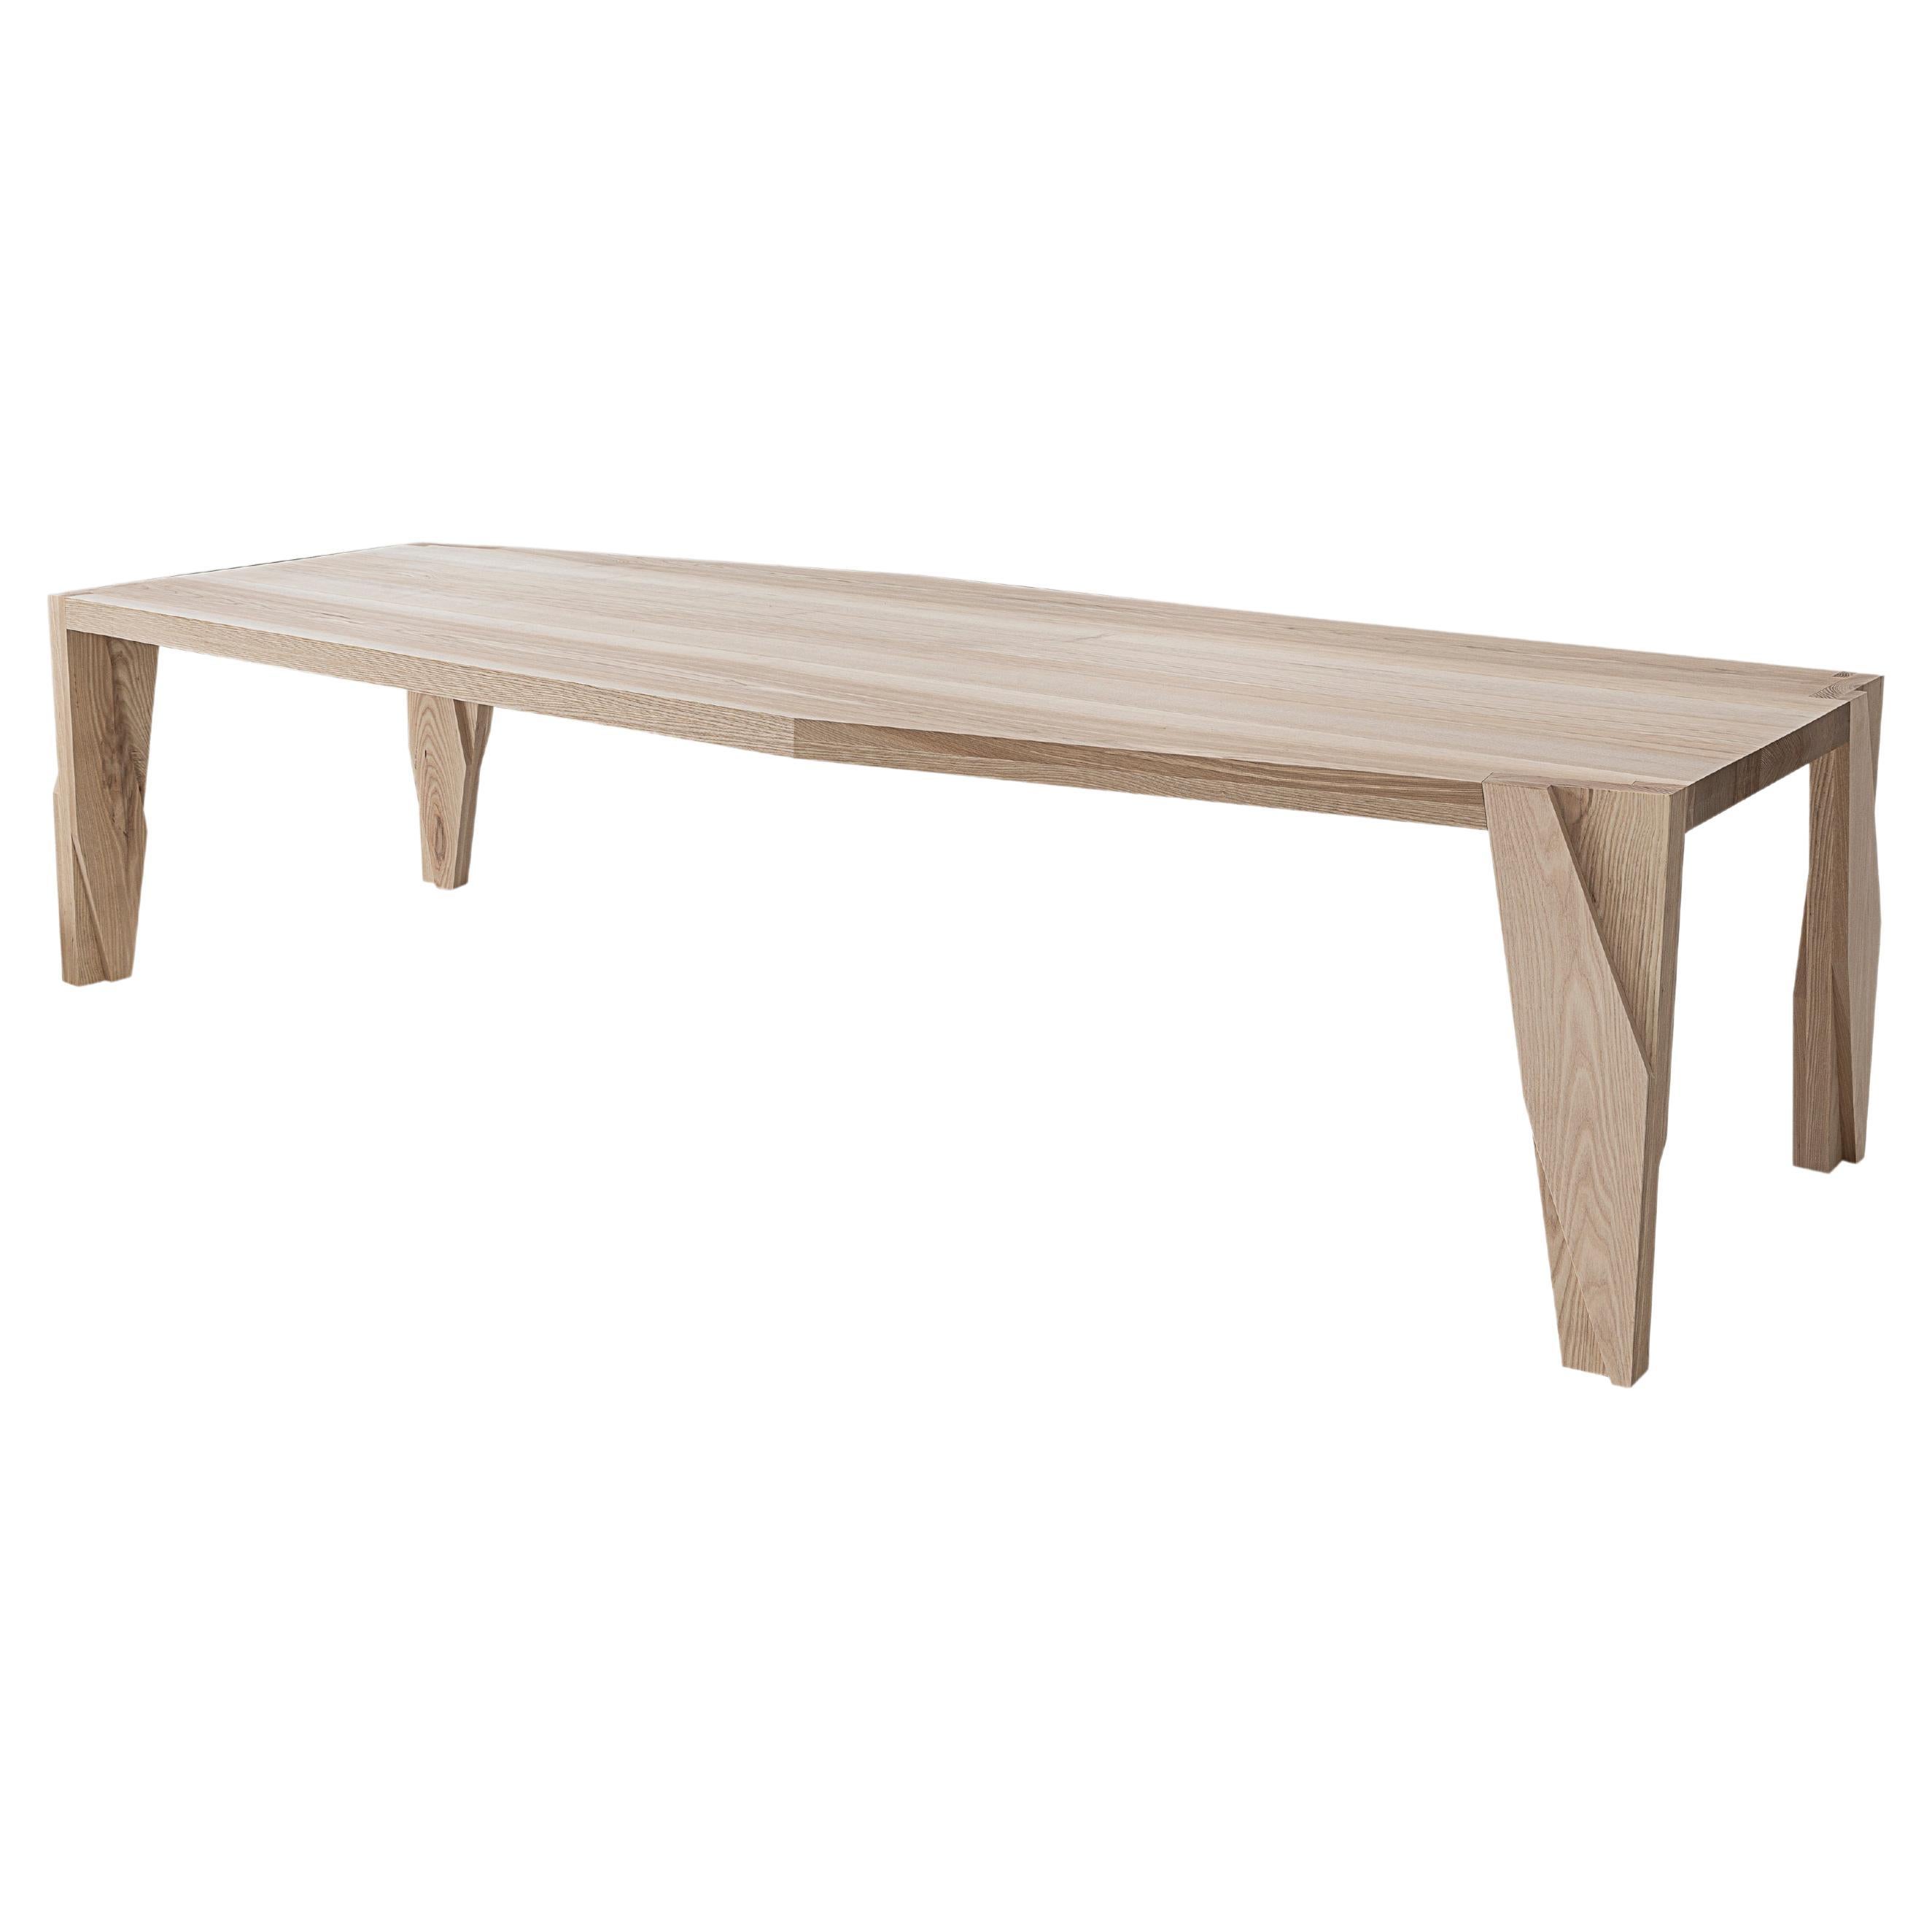 Contemporary Wooden 6 Seater Dining Table, Moramour by Adam Court for Okha